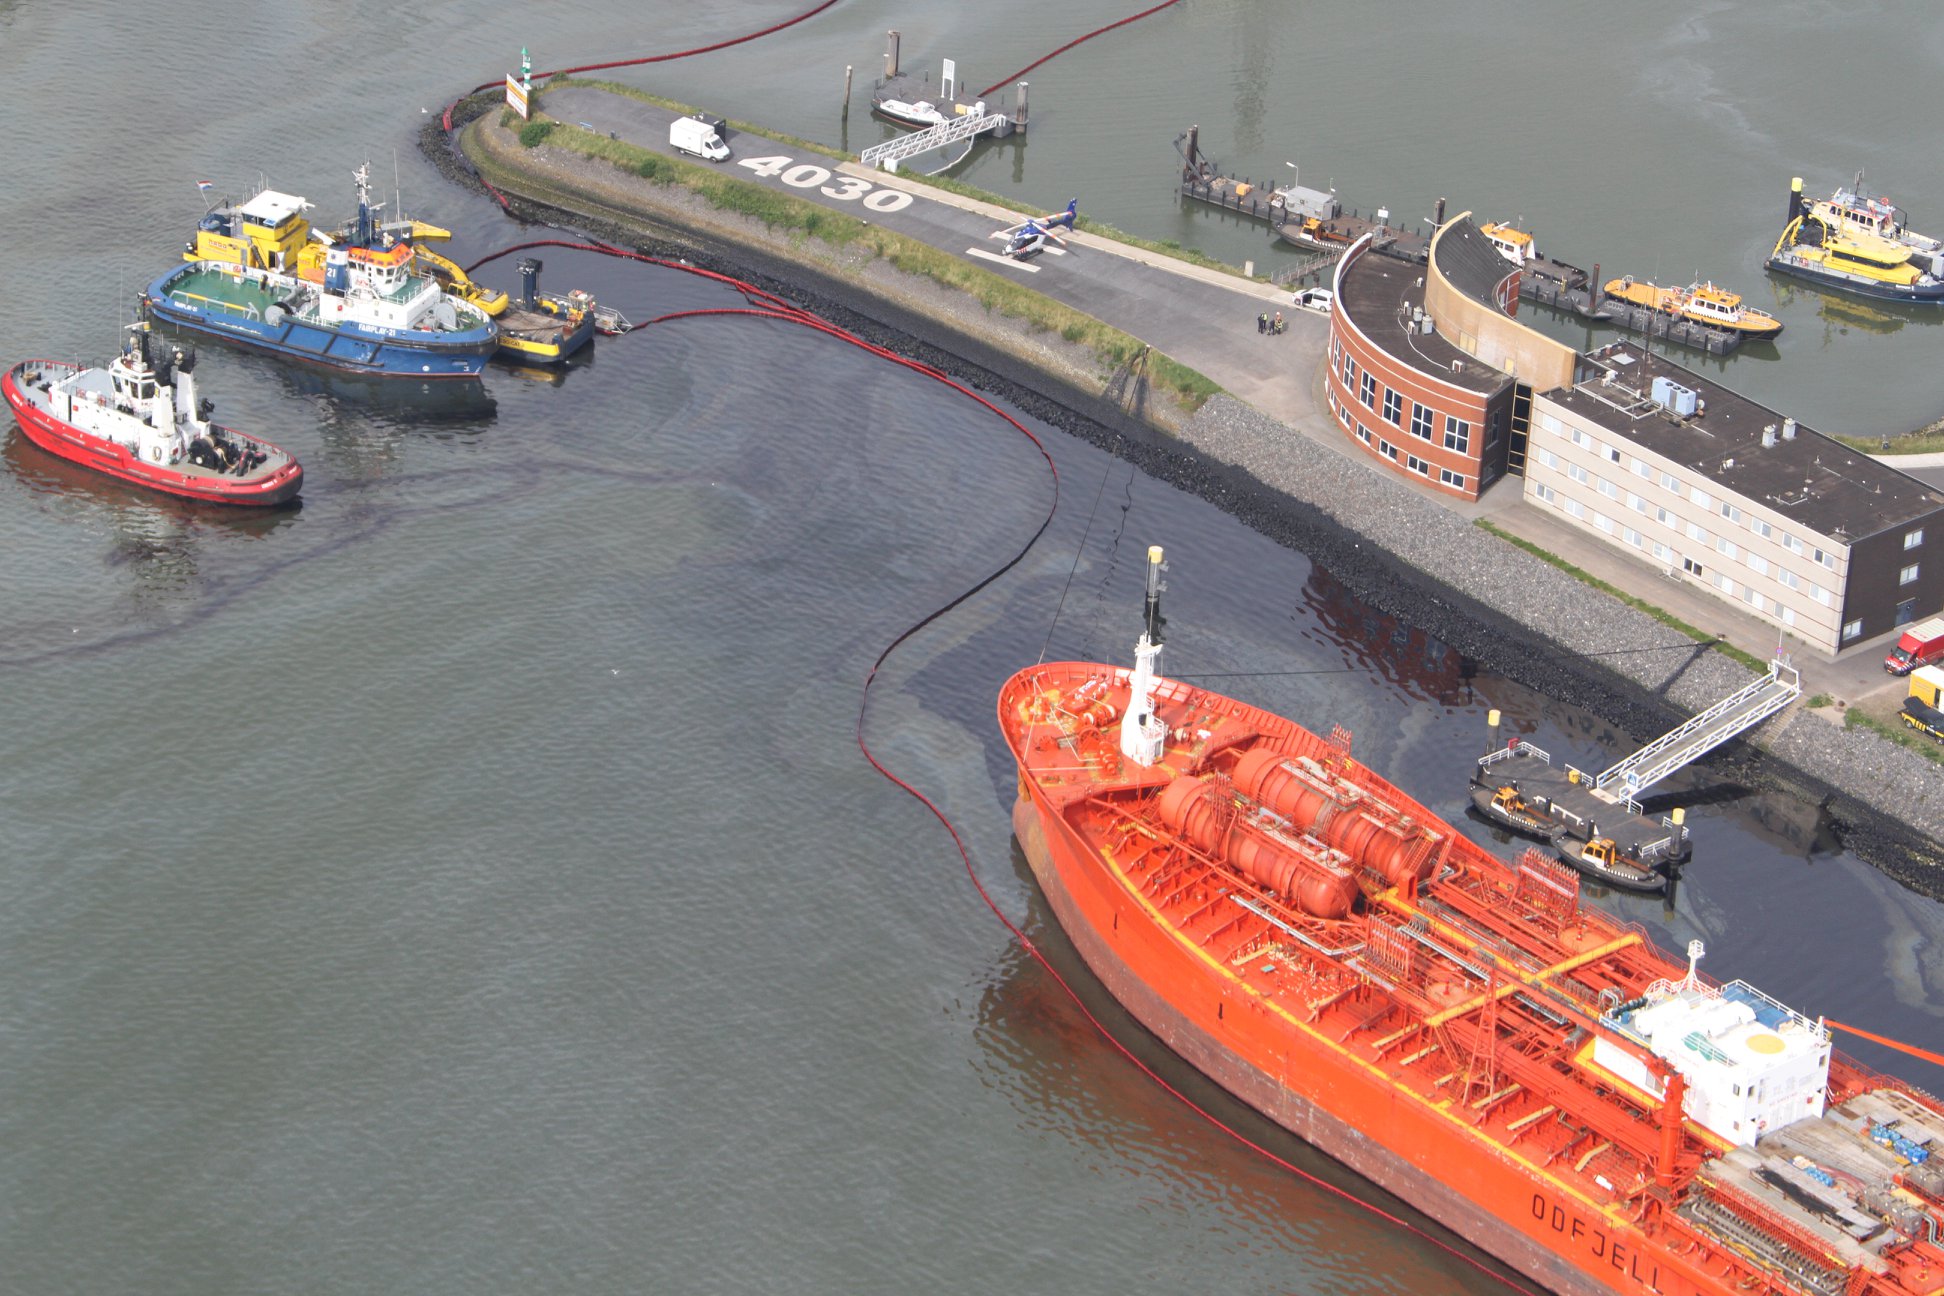 Oil spill after tanker collides with jetty